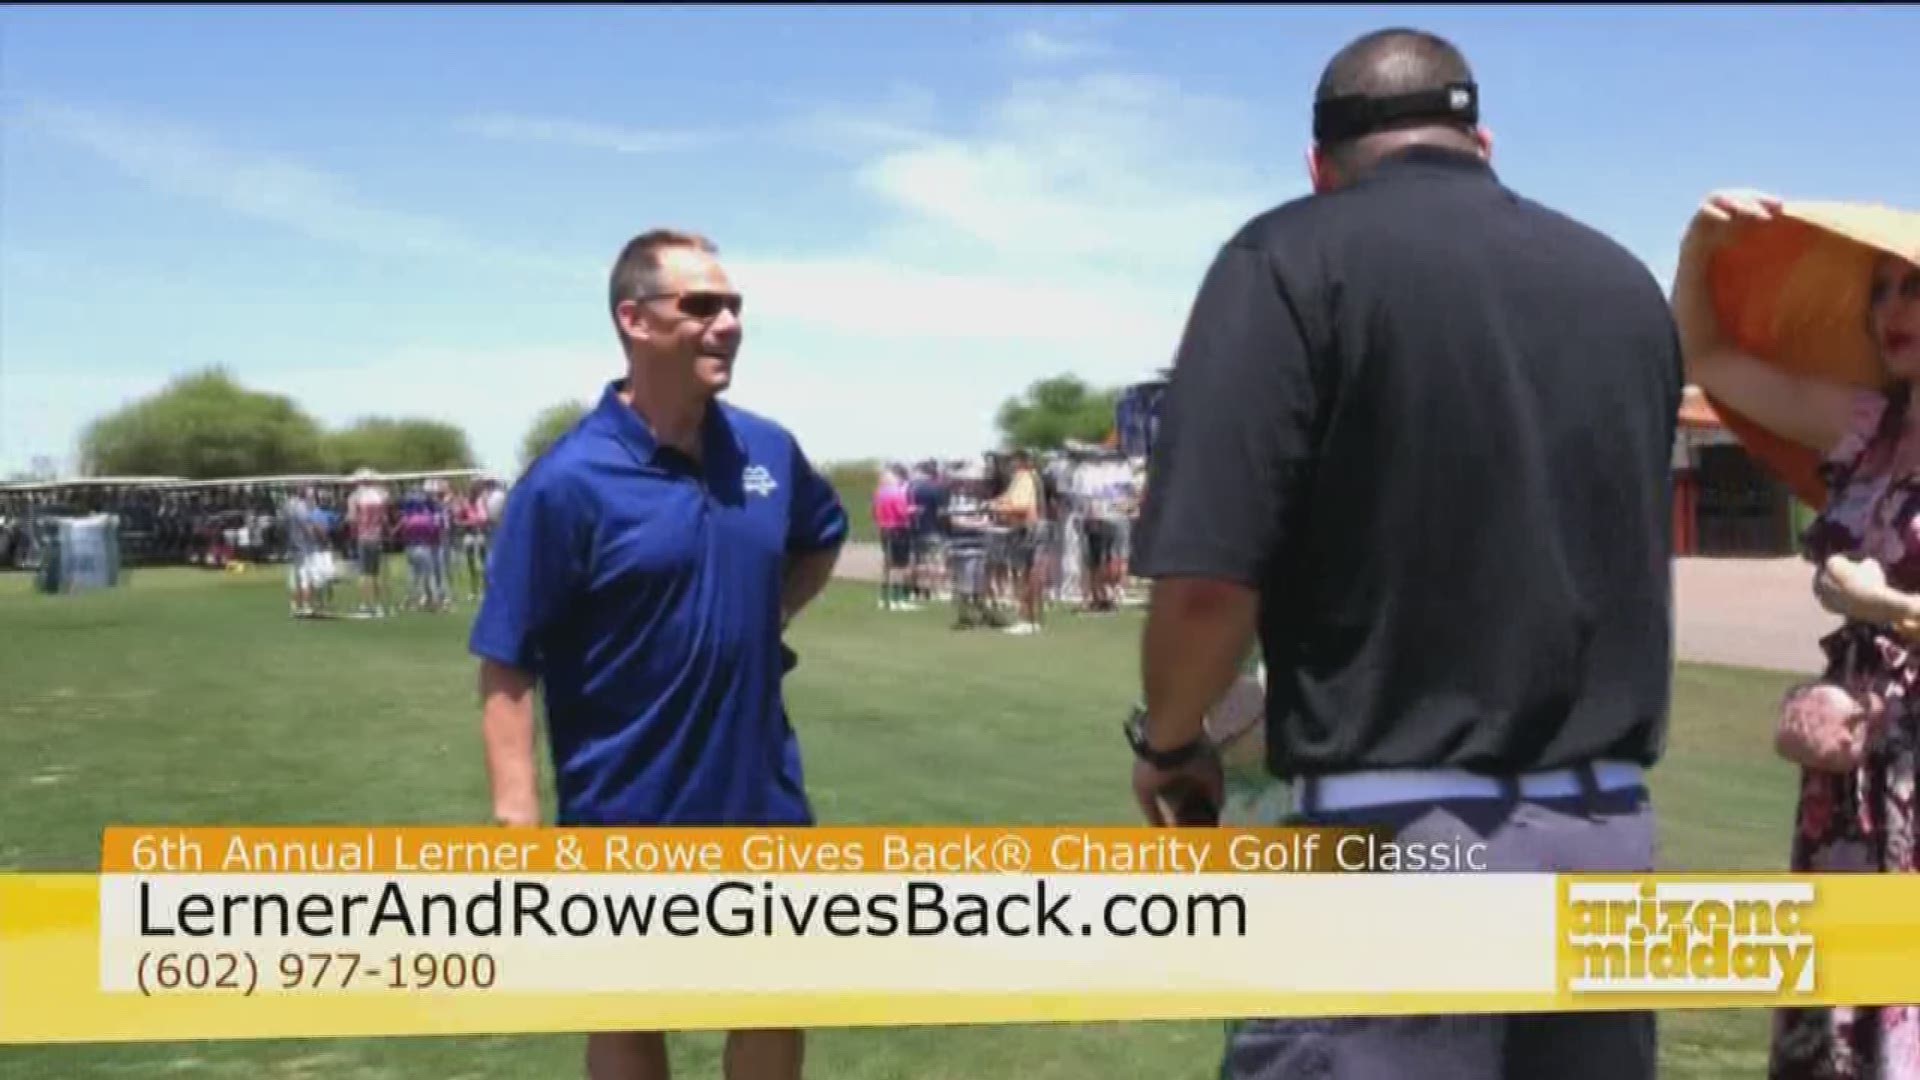 Kevin Rowe with Lerner & Rowe gives us the scoop on their annual charity golf classic and how you can get involved